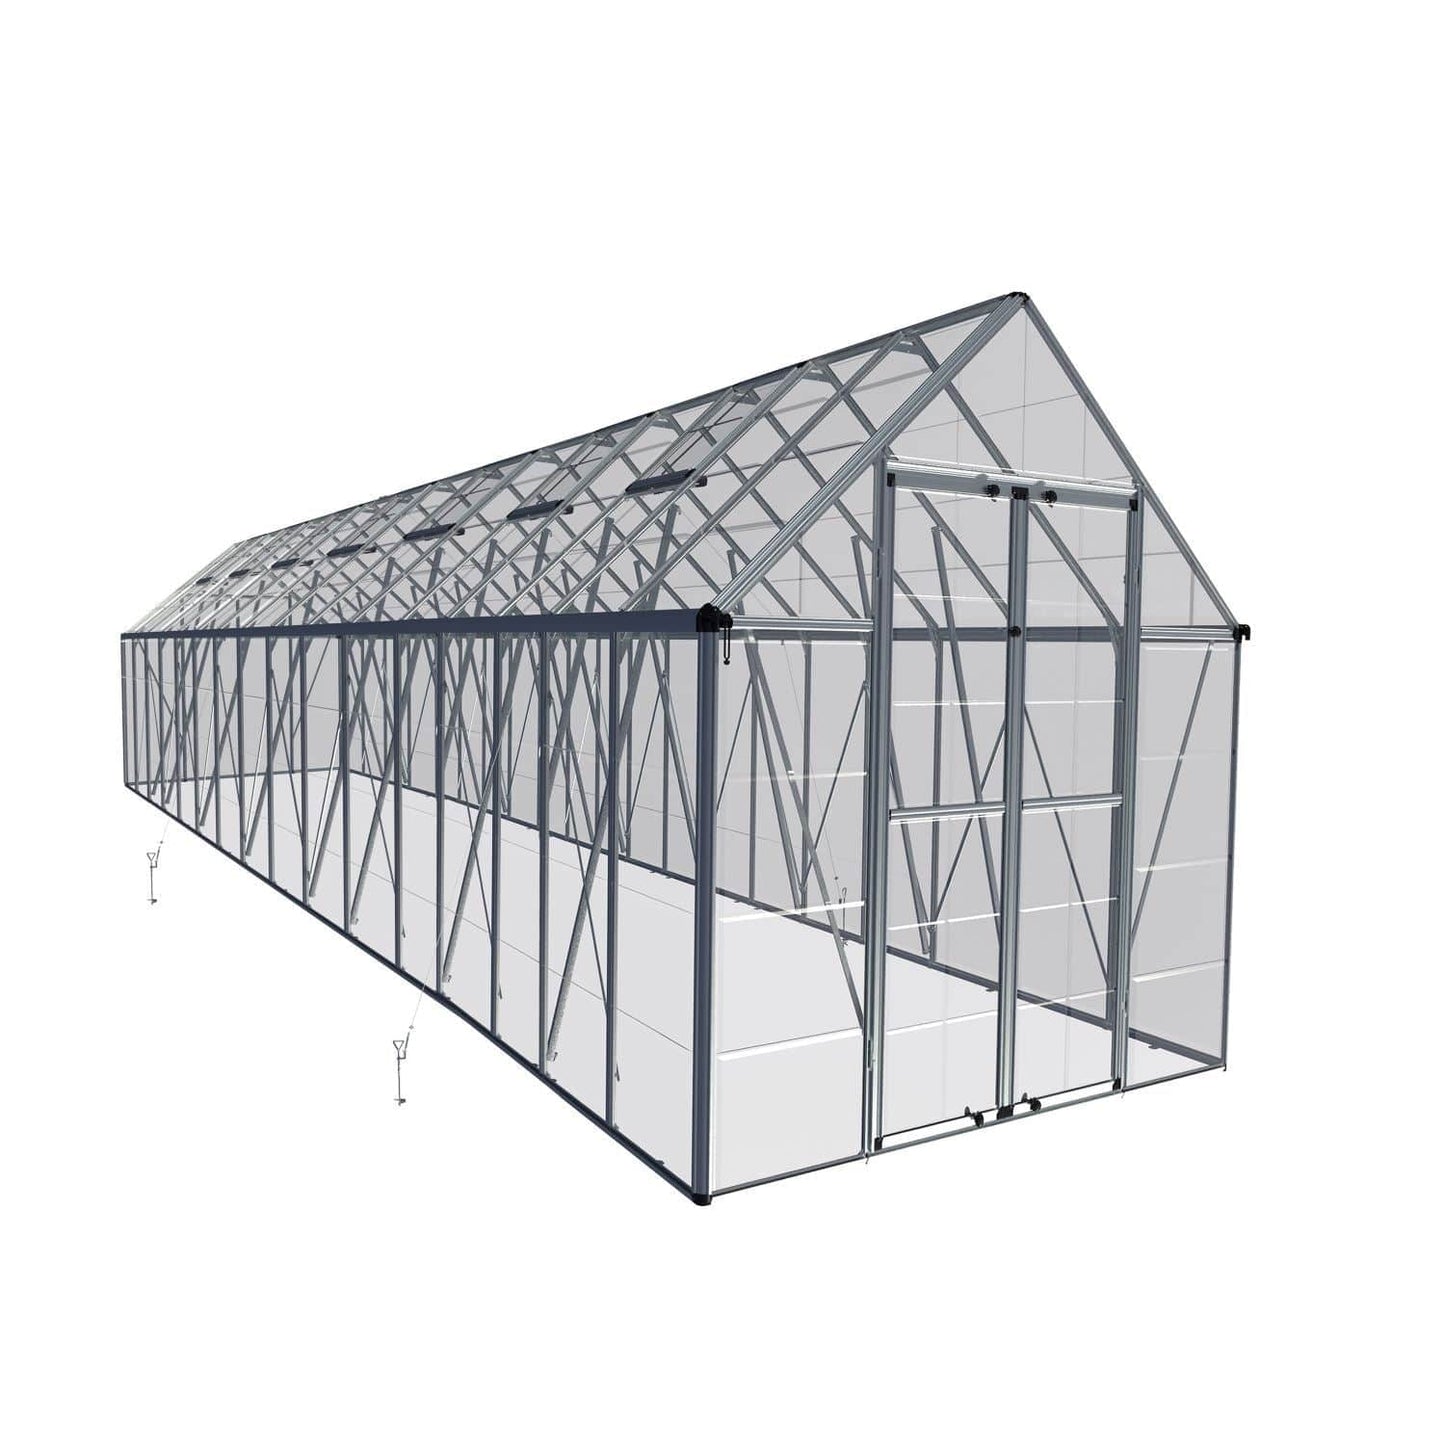 Palram - Canopia Greenhouse Kit 8' x 32' Palram - Canopia | Snap & Grow Greenhouse - 8' Wide - Silver HG8032